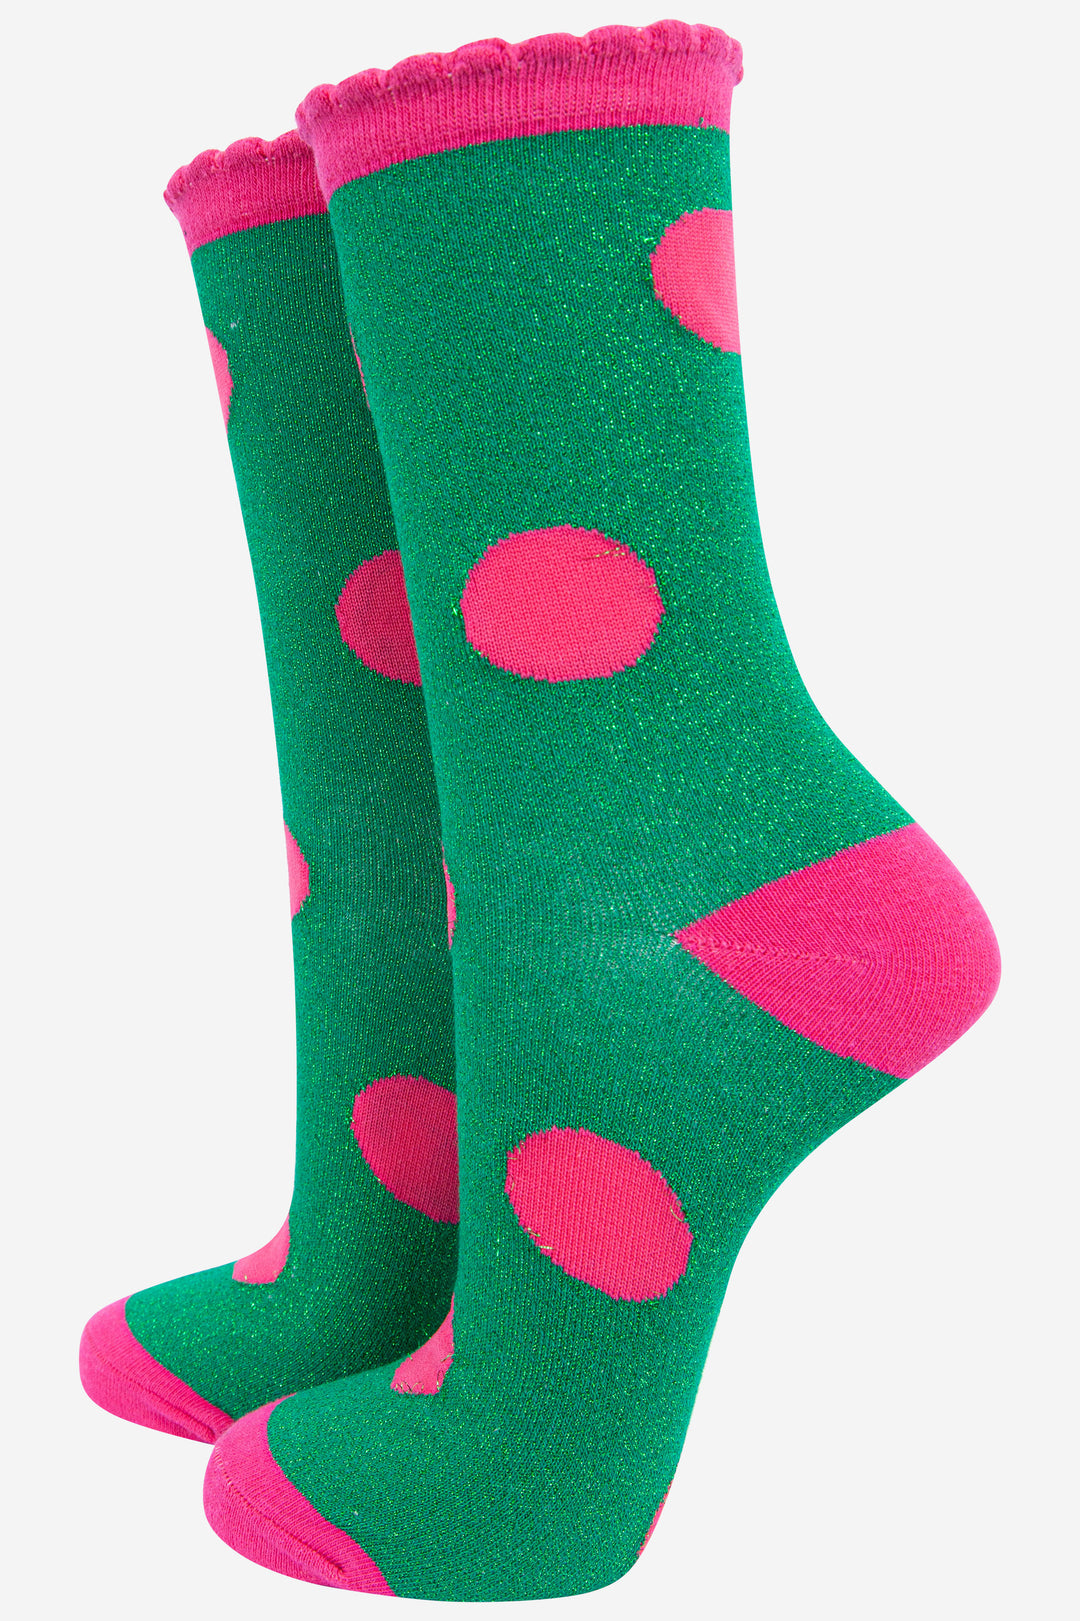 green and pink polka dot glitter socks with pink scalloped top and an all over glitter sparkle